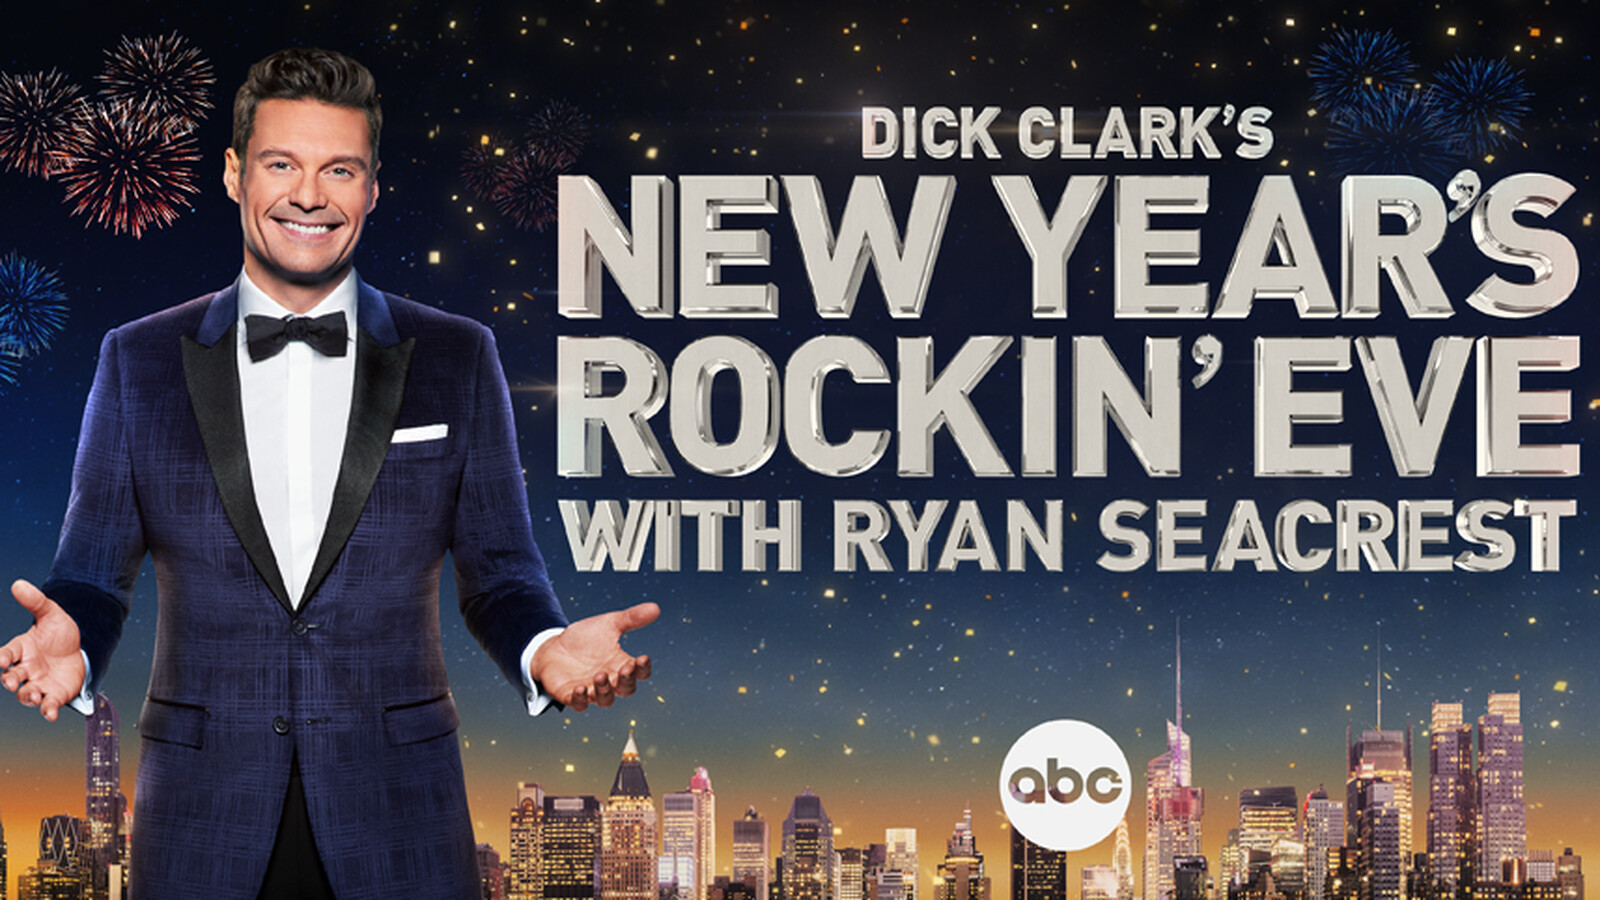 BTS to Perform at 'Dick Clark's New Year's Rockin' Eve' In New York